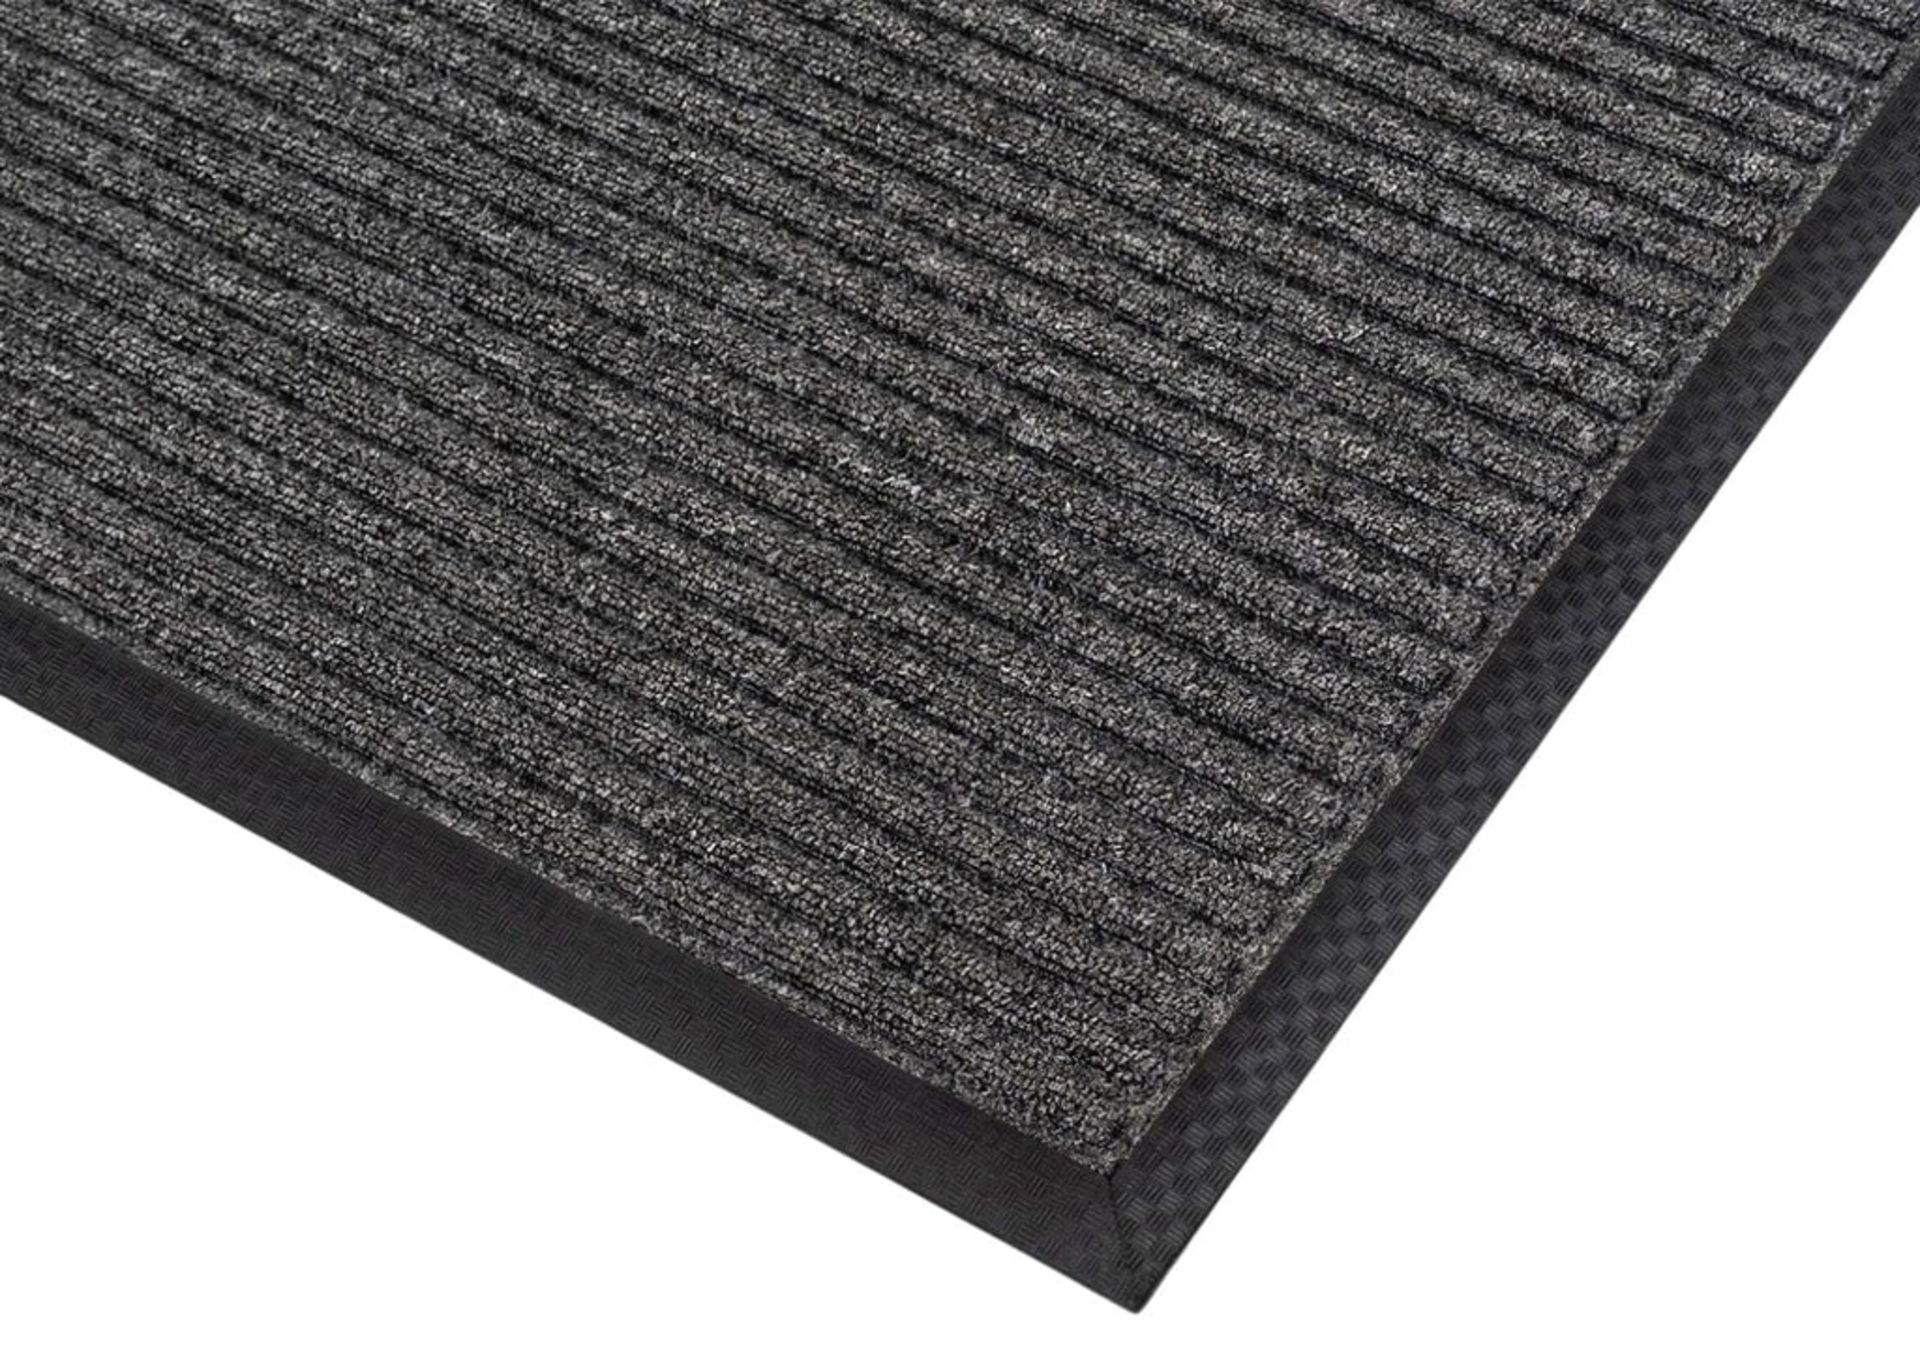 2 X NEW 1.2M X 1.5M HEAVY DUTY INDUSTRIAL RIBBED ENTRANCE MAT IN GREY